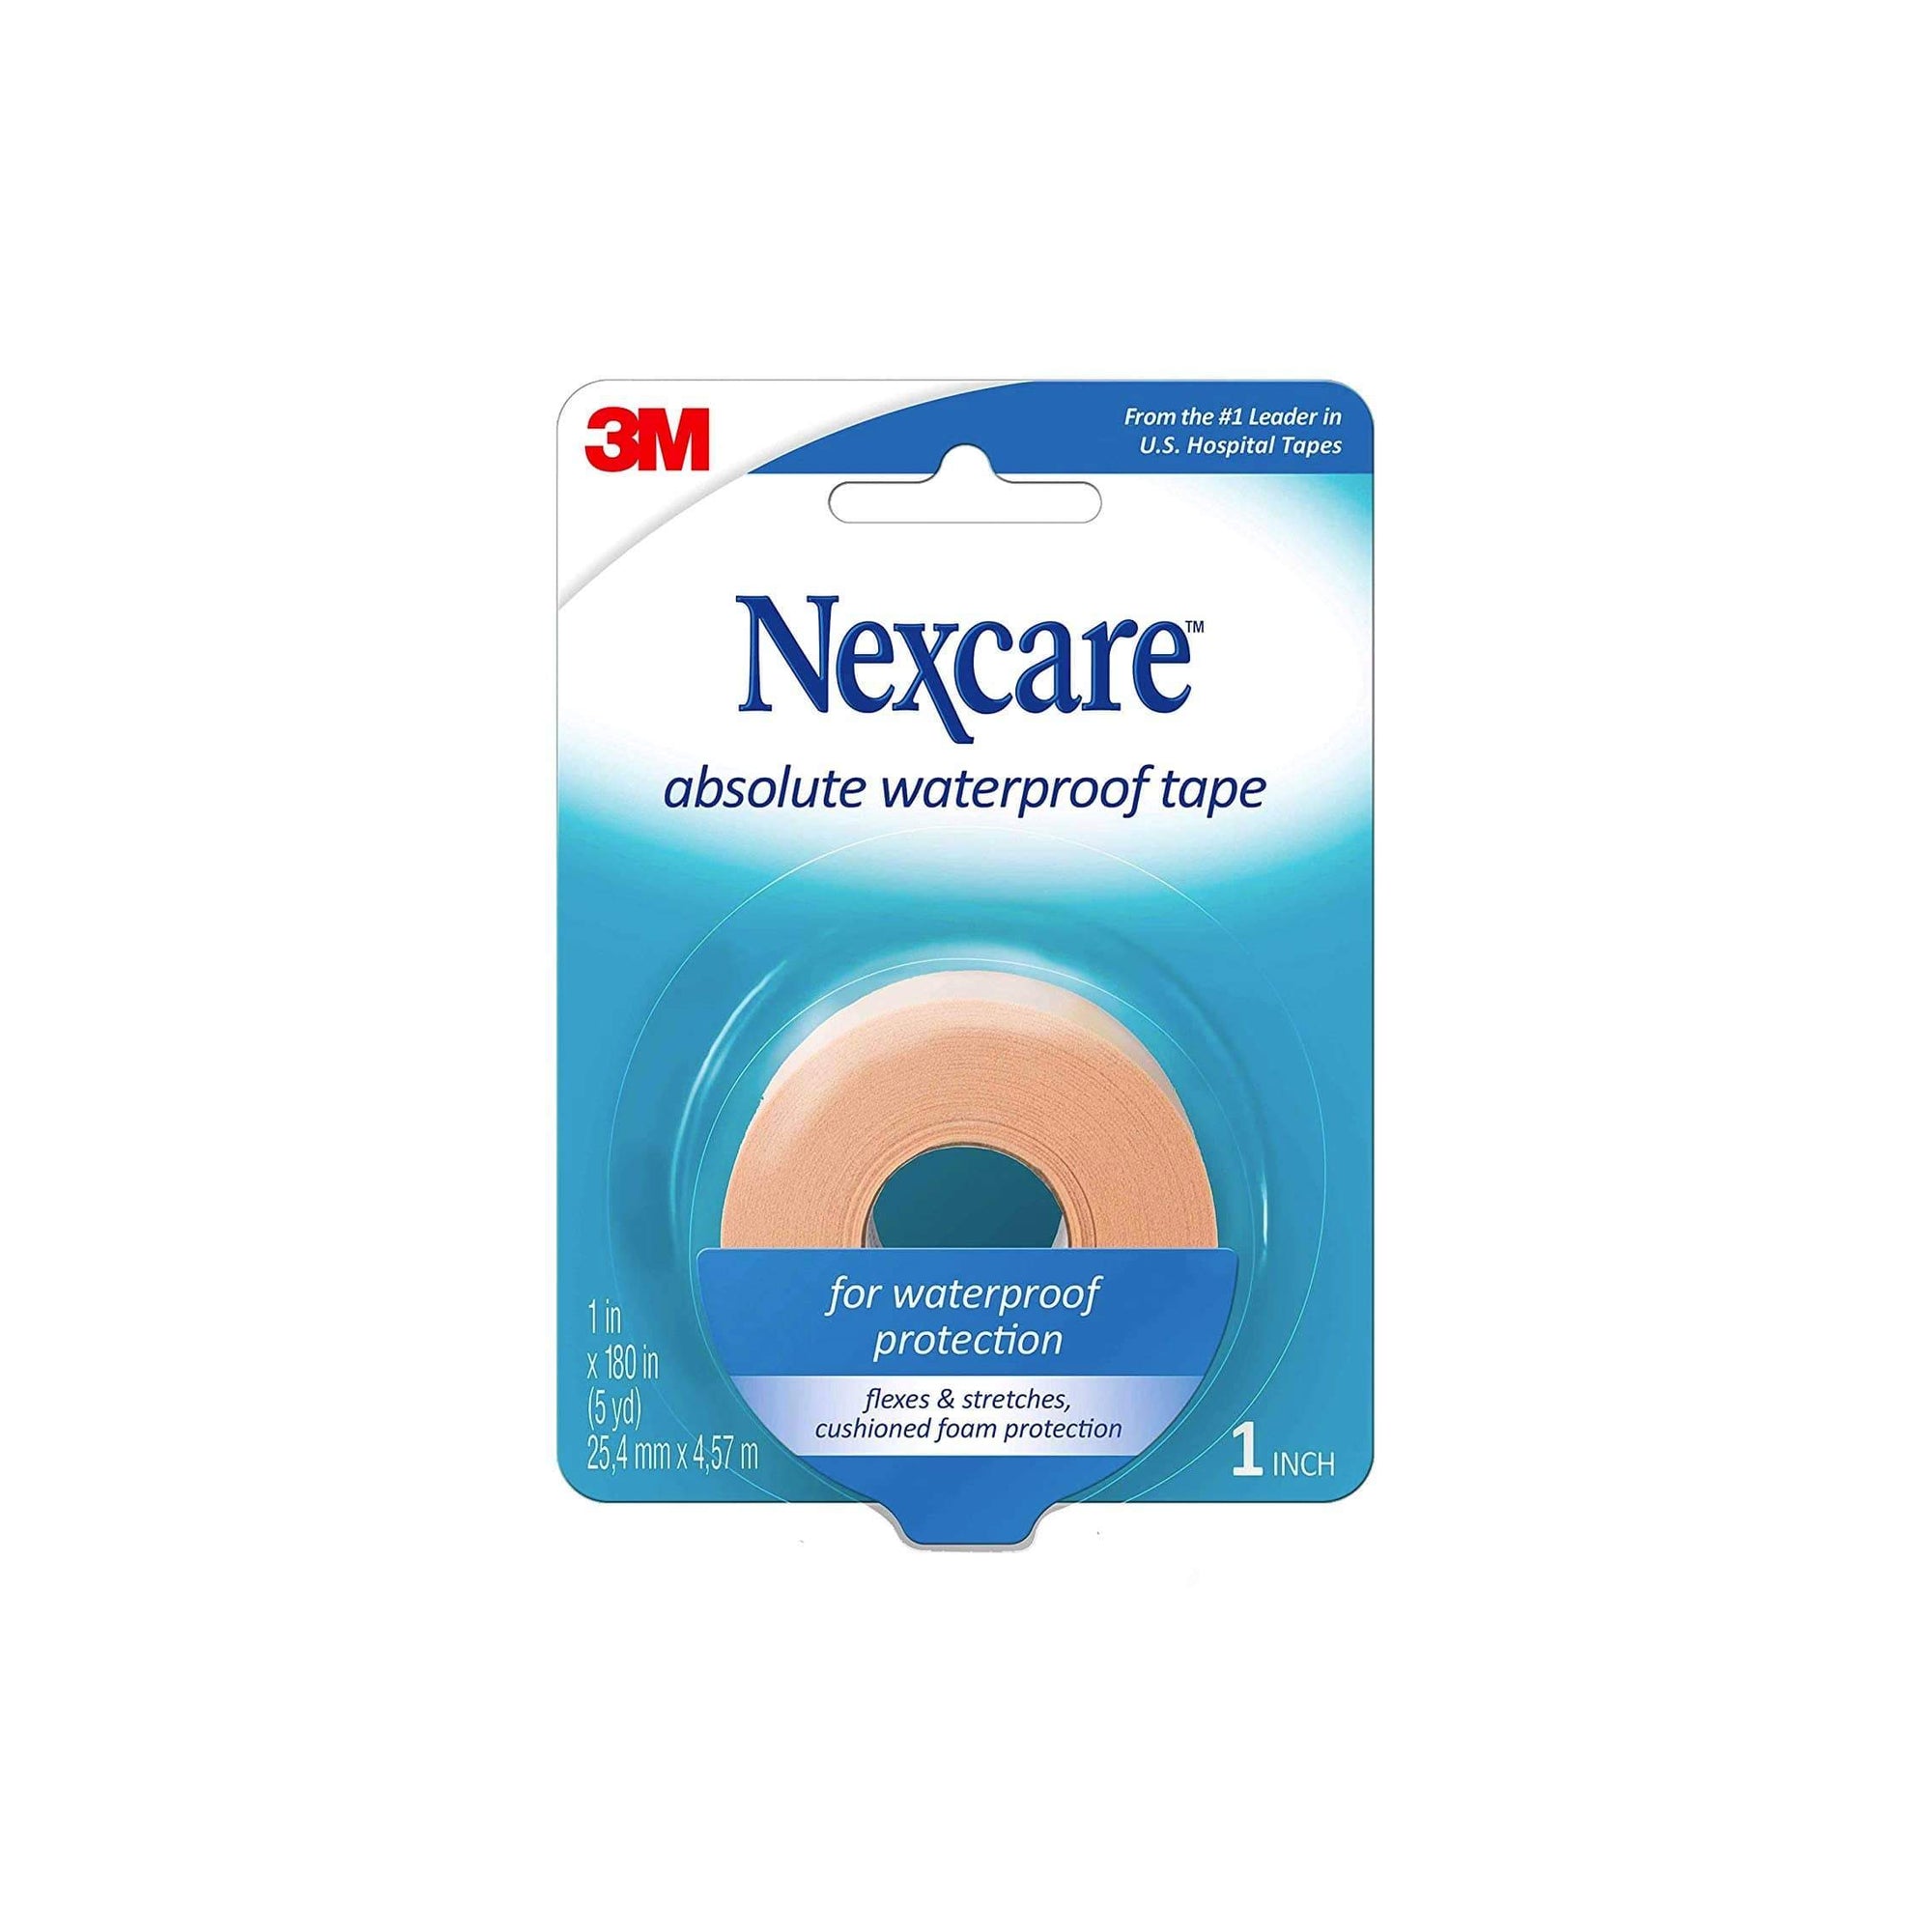 3M Nexcare First Aid Tape - Absolute Waterproof Tape